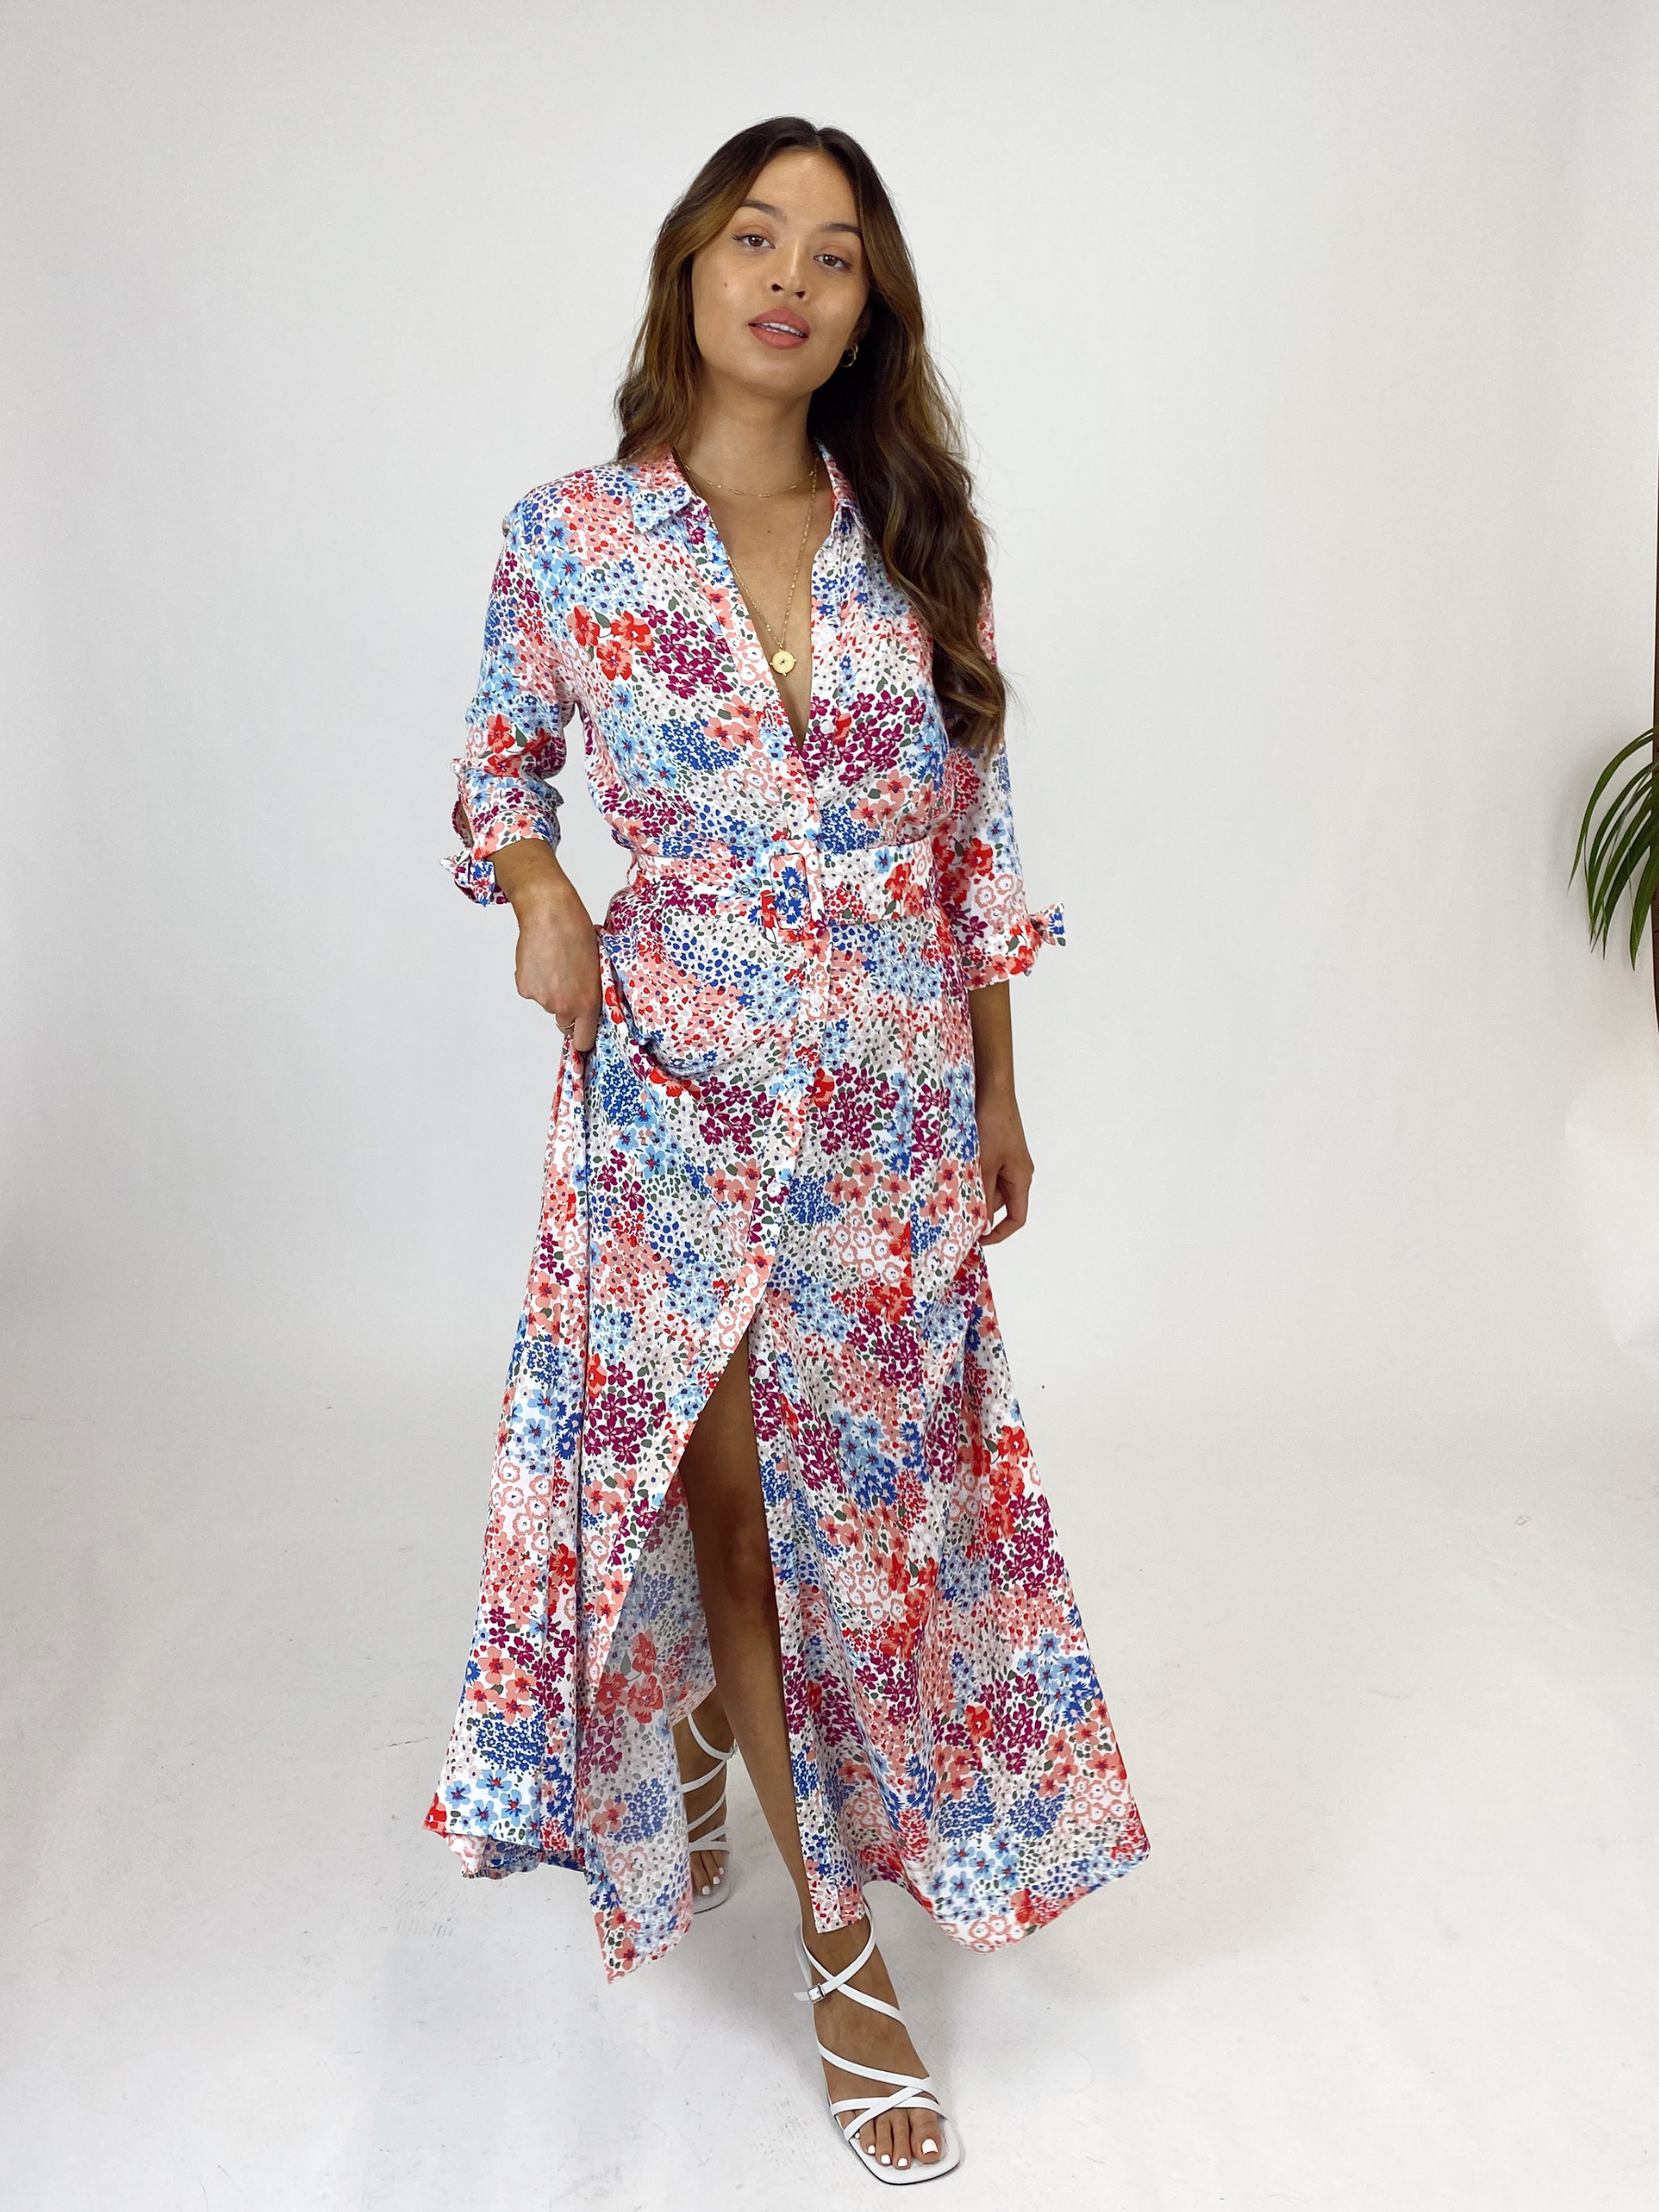 Style Cheat Red Floral Shirt Dress 8